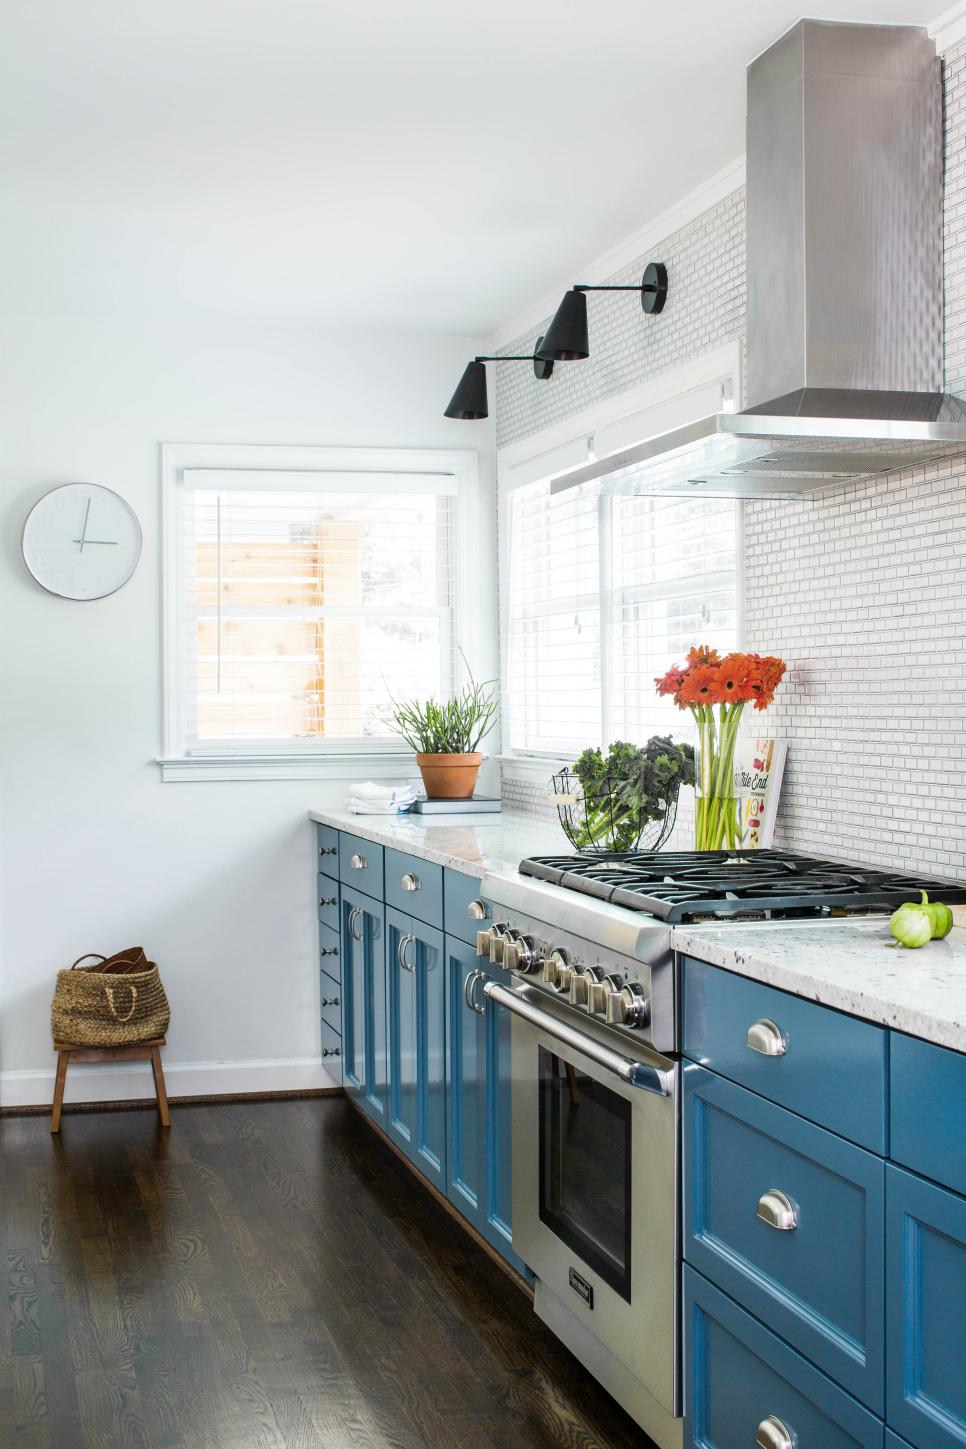 Modern White and Blue Kitchen with Metal Vent Hood, Tile Backsplash and Simple Sconces and Clock